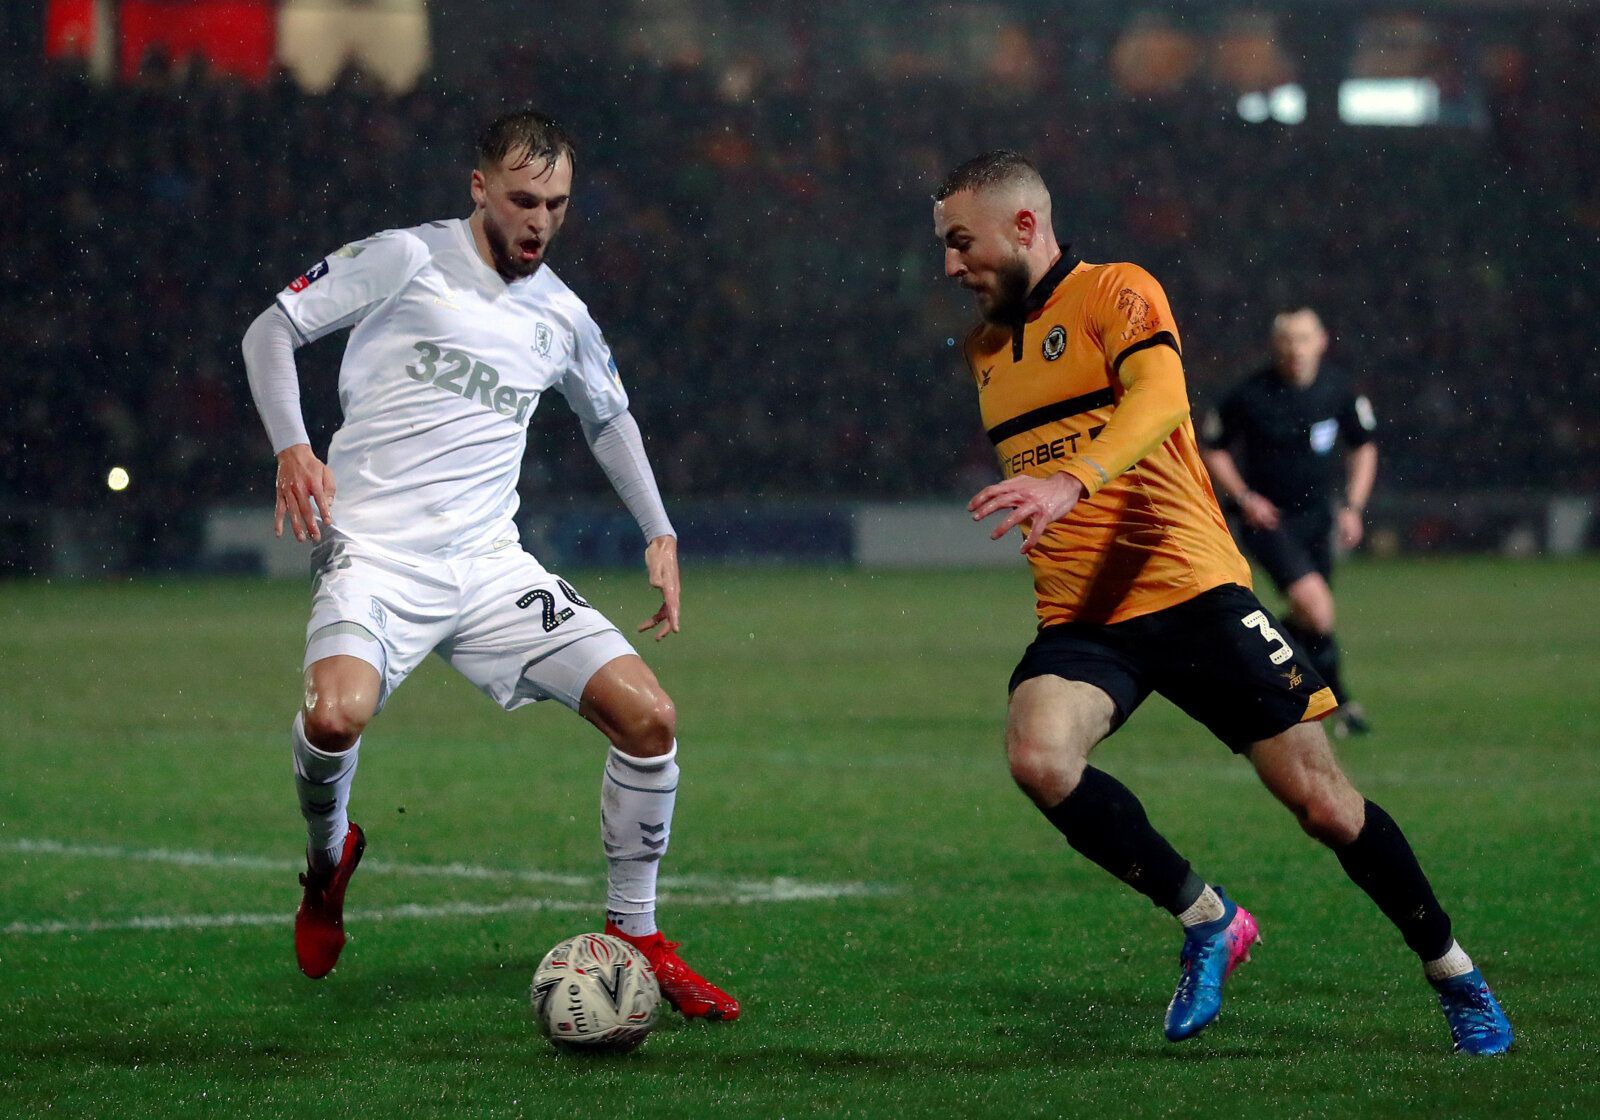 Soccer Football - FA Cup Fourth Round Replay - Newport County v Middlesbrough - Rodney Parade, Newport, Britain - February 5, 2019   Middlesbrough's Lewis Wing in action with Newport County's Dan Butler   Action Images/Andrew Couldridge